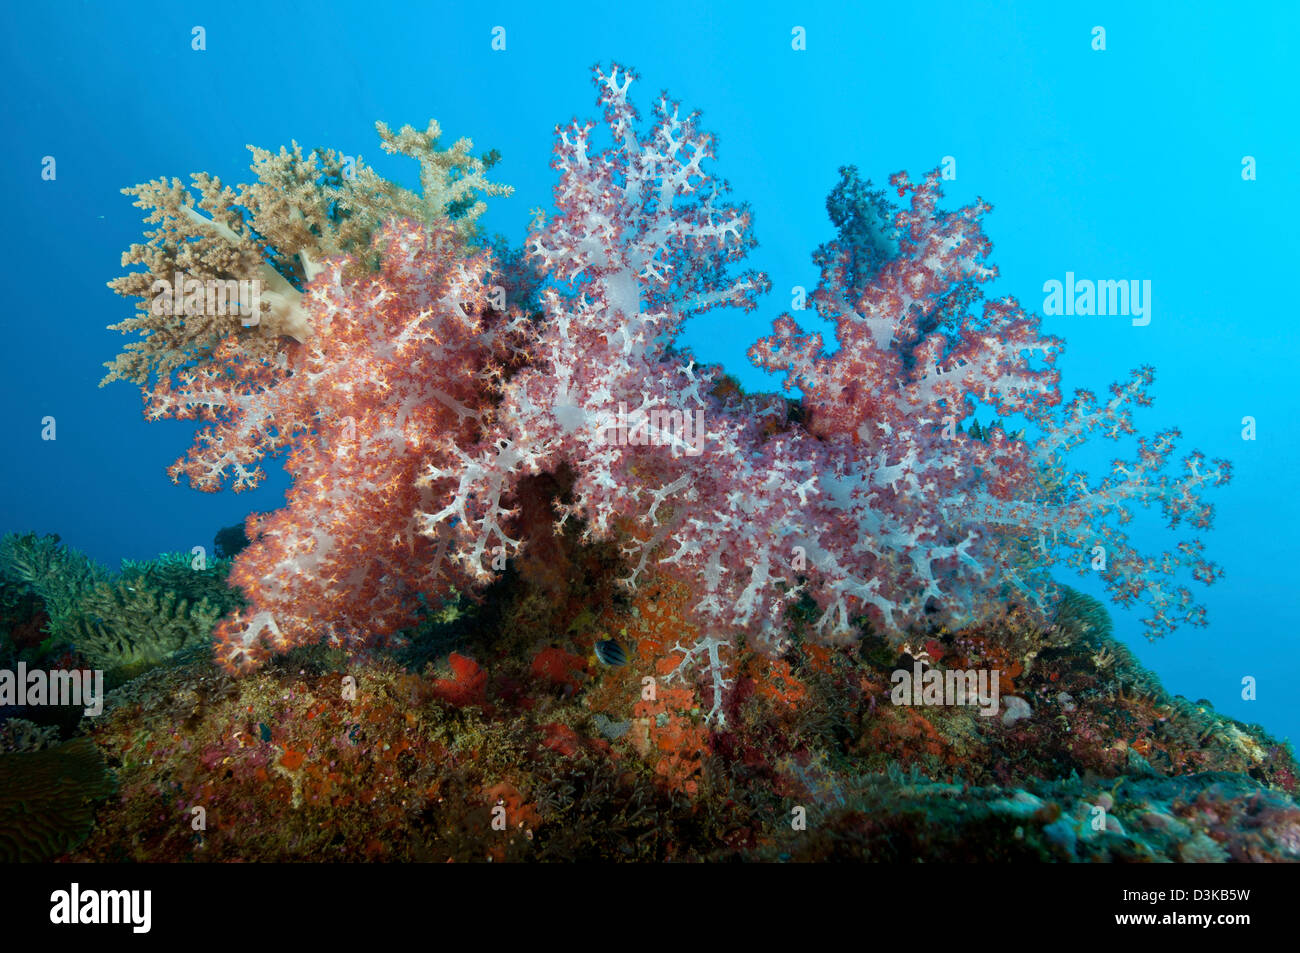 Fluffy brown, pink and red dendronephtya soft coral, Indonesia. Stock Photo